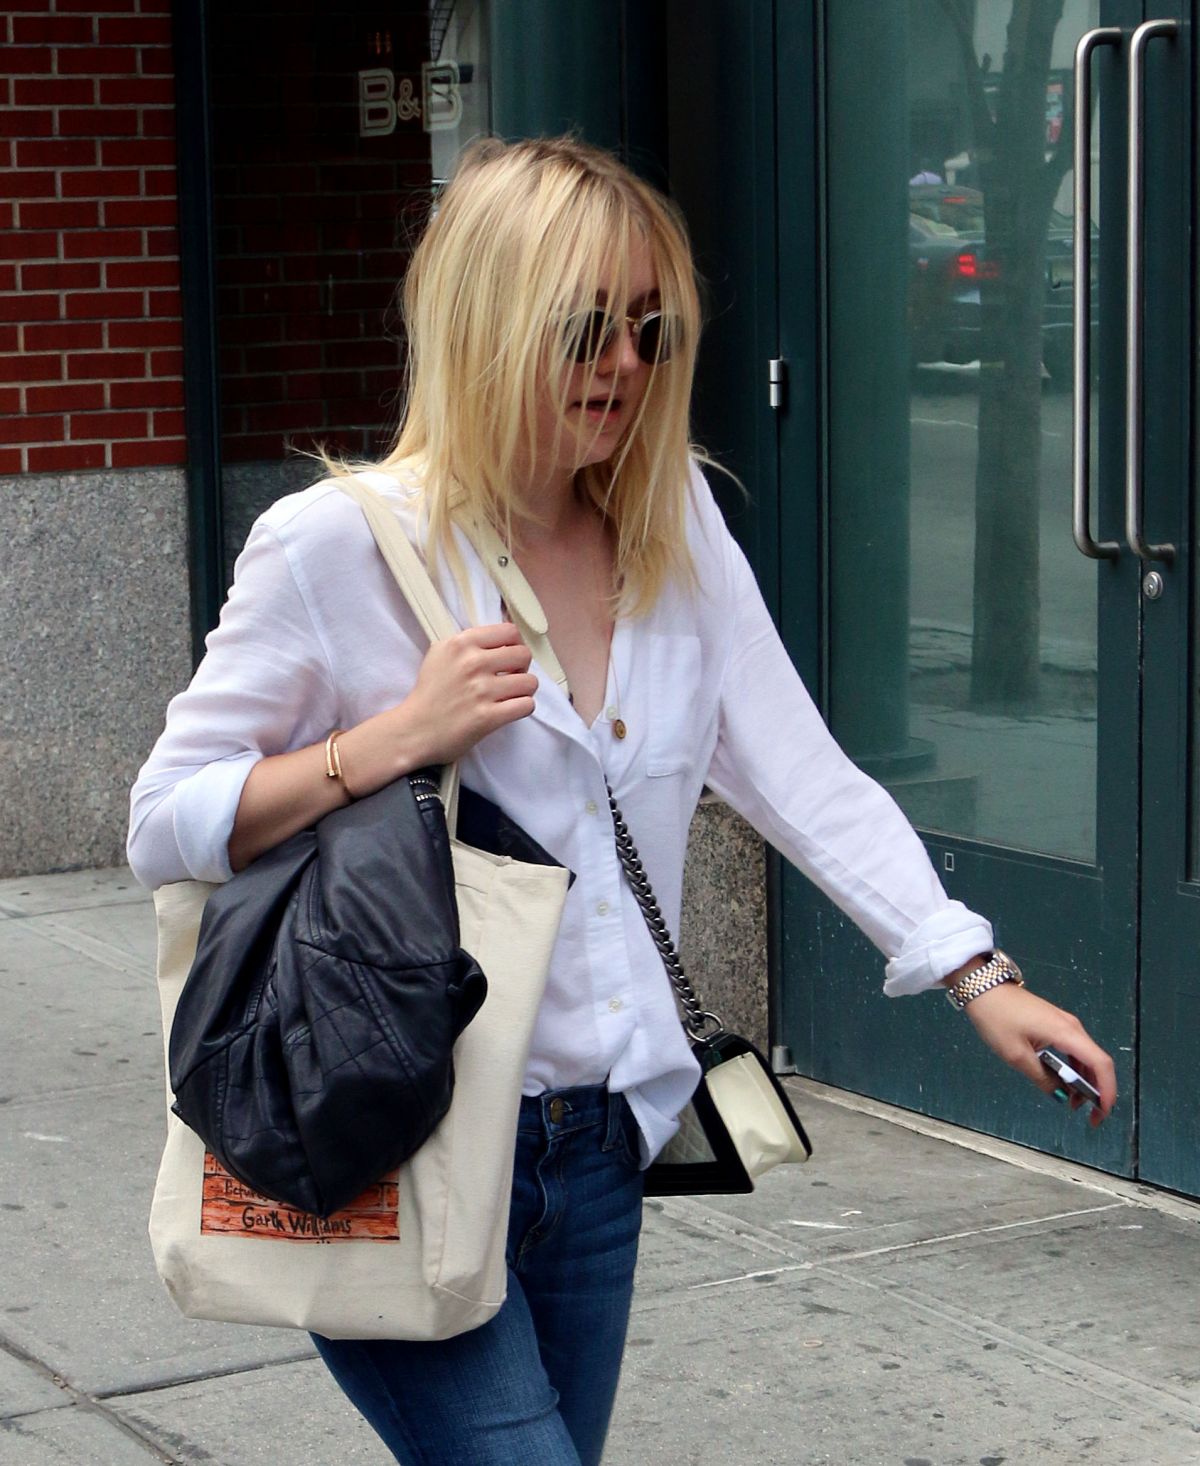 DAKOTA FANNING Out and About in New York – HawtCelebs